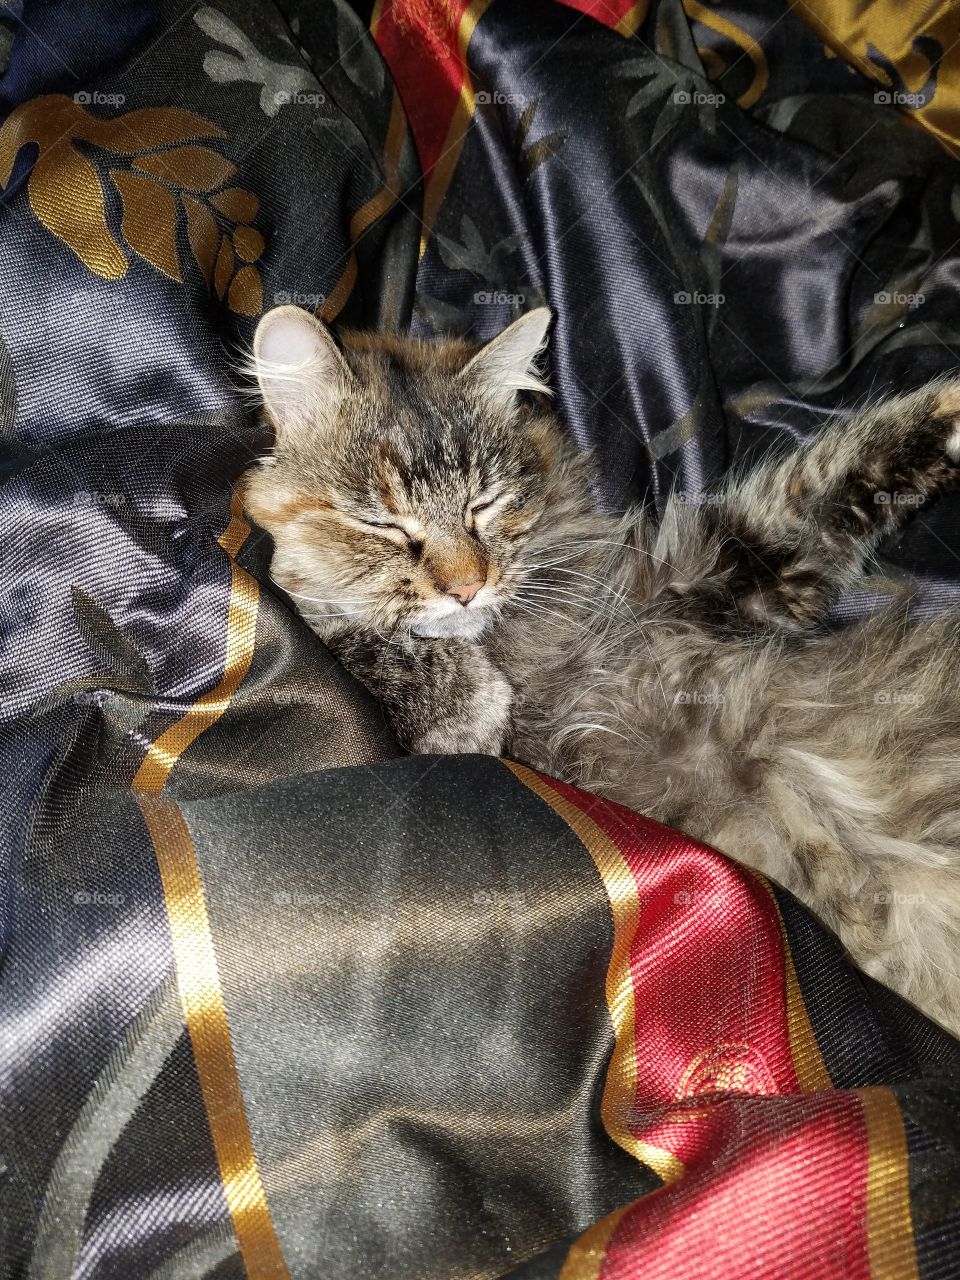 Just a happy kitty laying in bed after going from sad little stray to queen of the house.